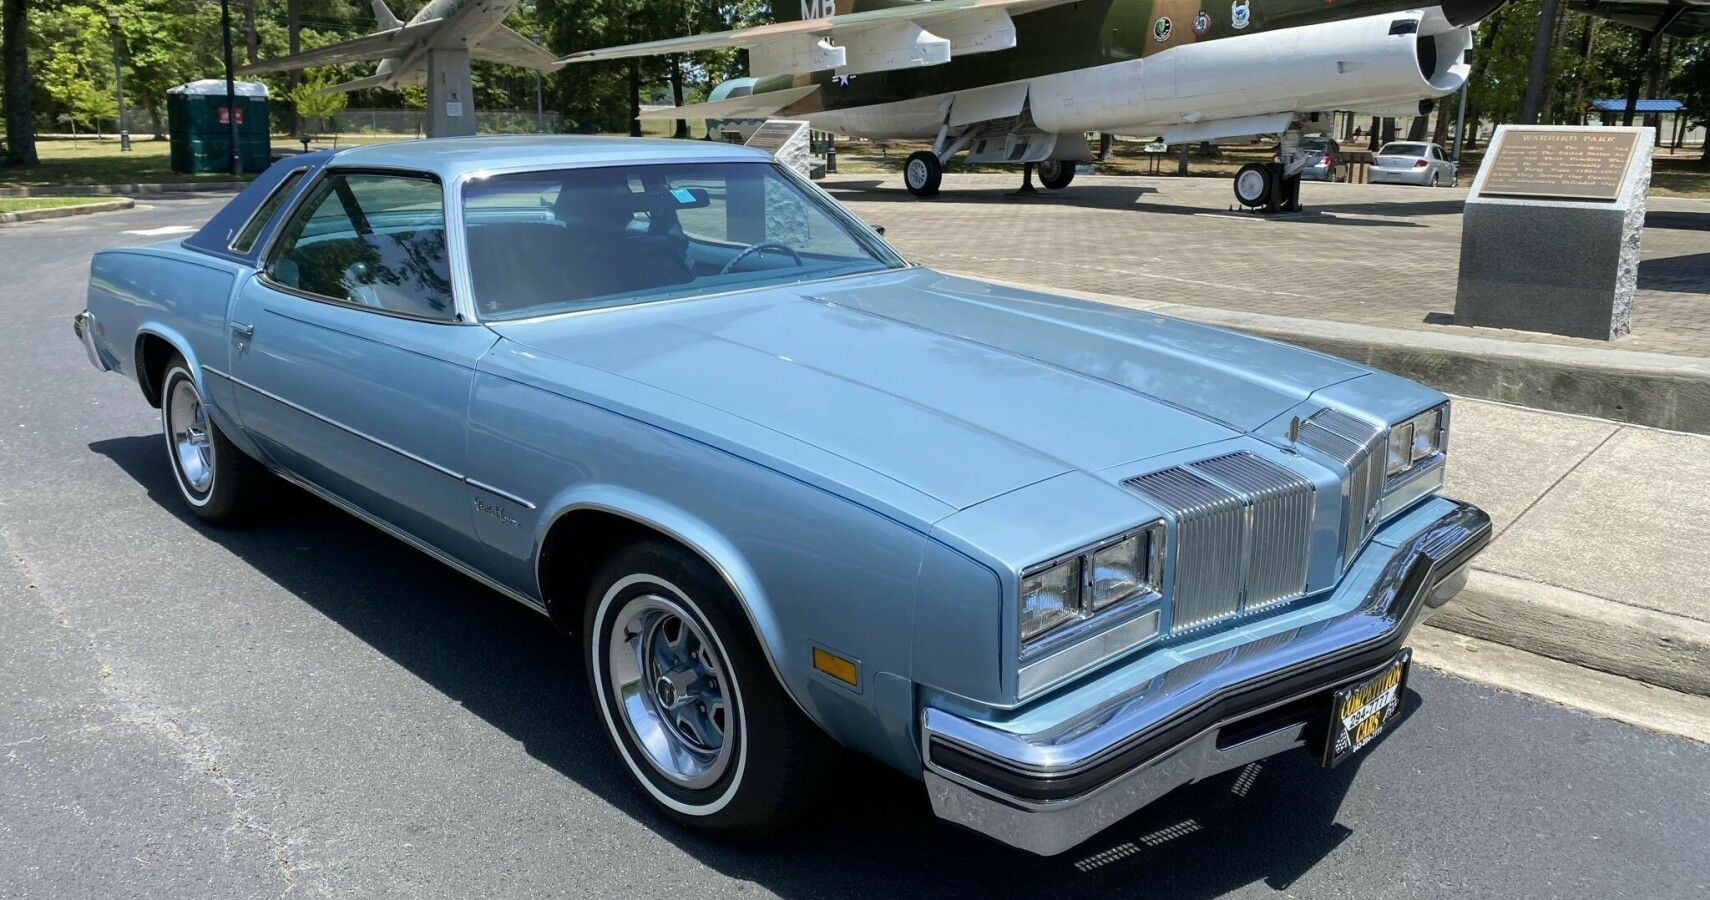 10 Things We Love About The 1976 Oldsmobile Cutlass Supreme